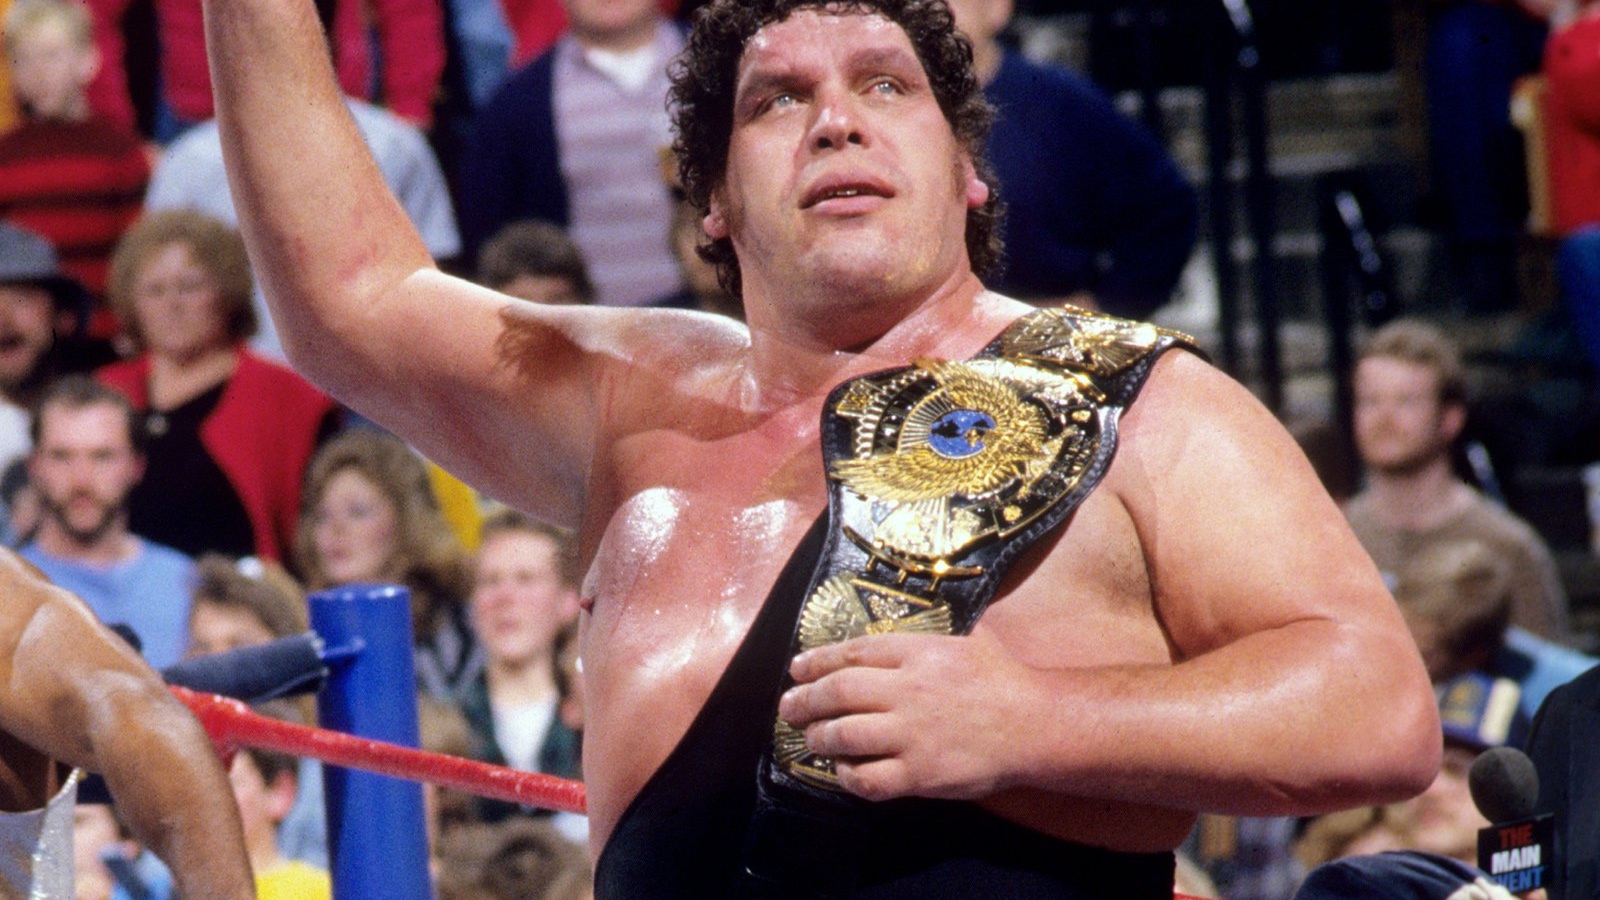 Bruce Prichard On The Relationship Between Andre The Giant And Bam Bam Bige...